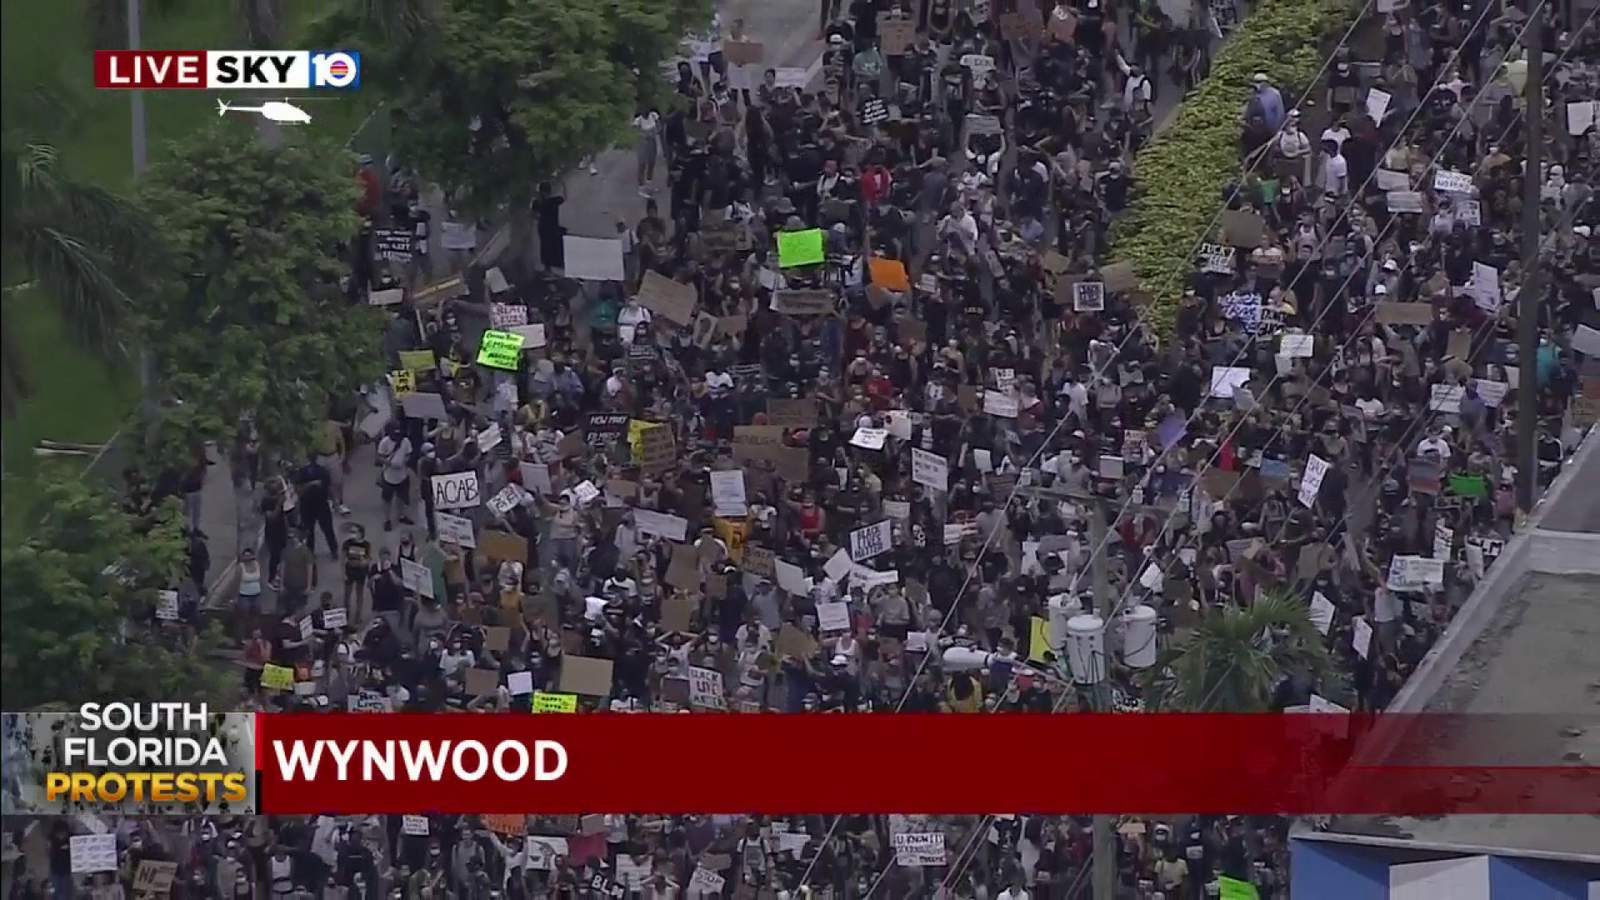 Large Miami protest starts in Wynwood giving a glimpse into weekend demonstrations